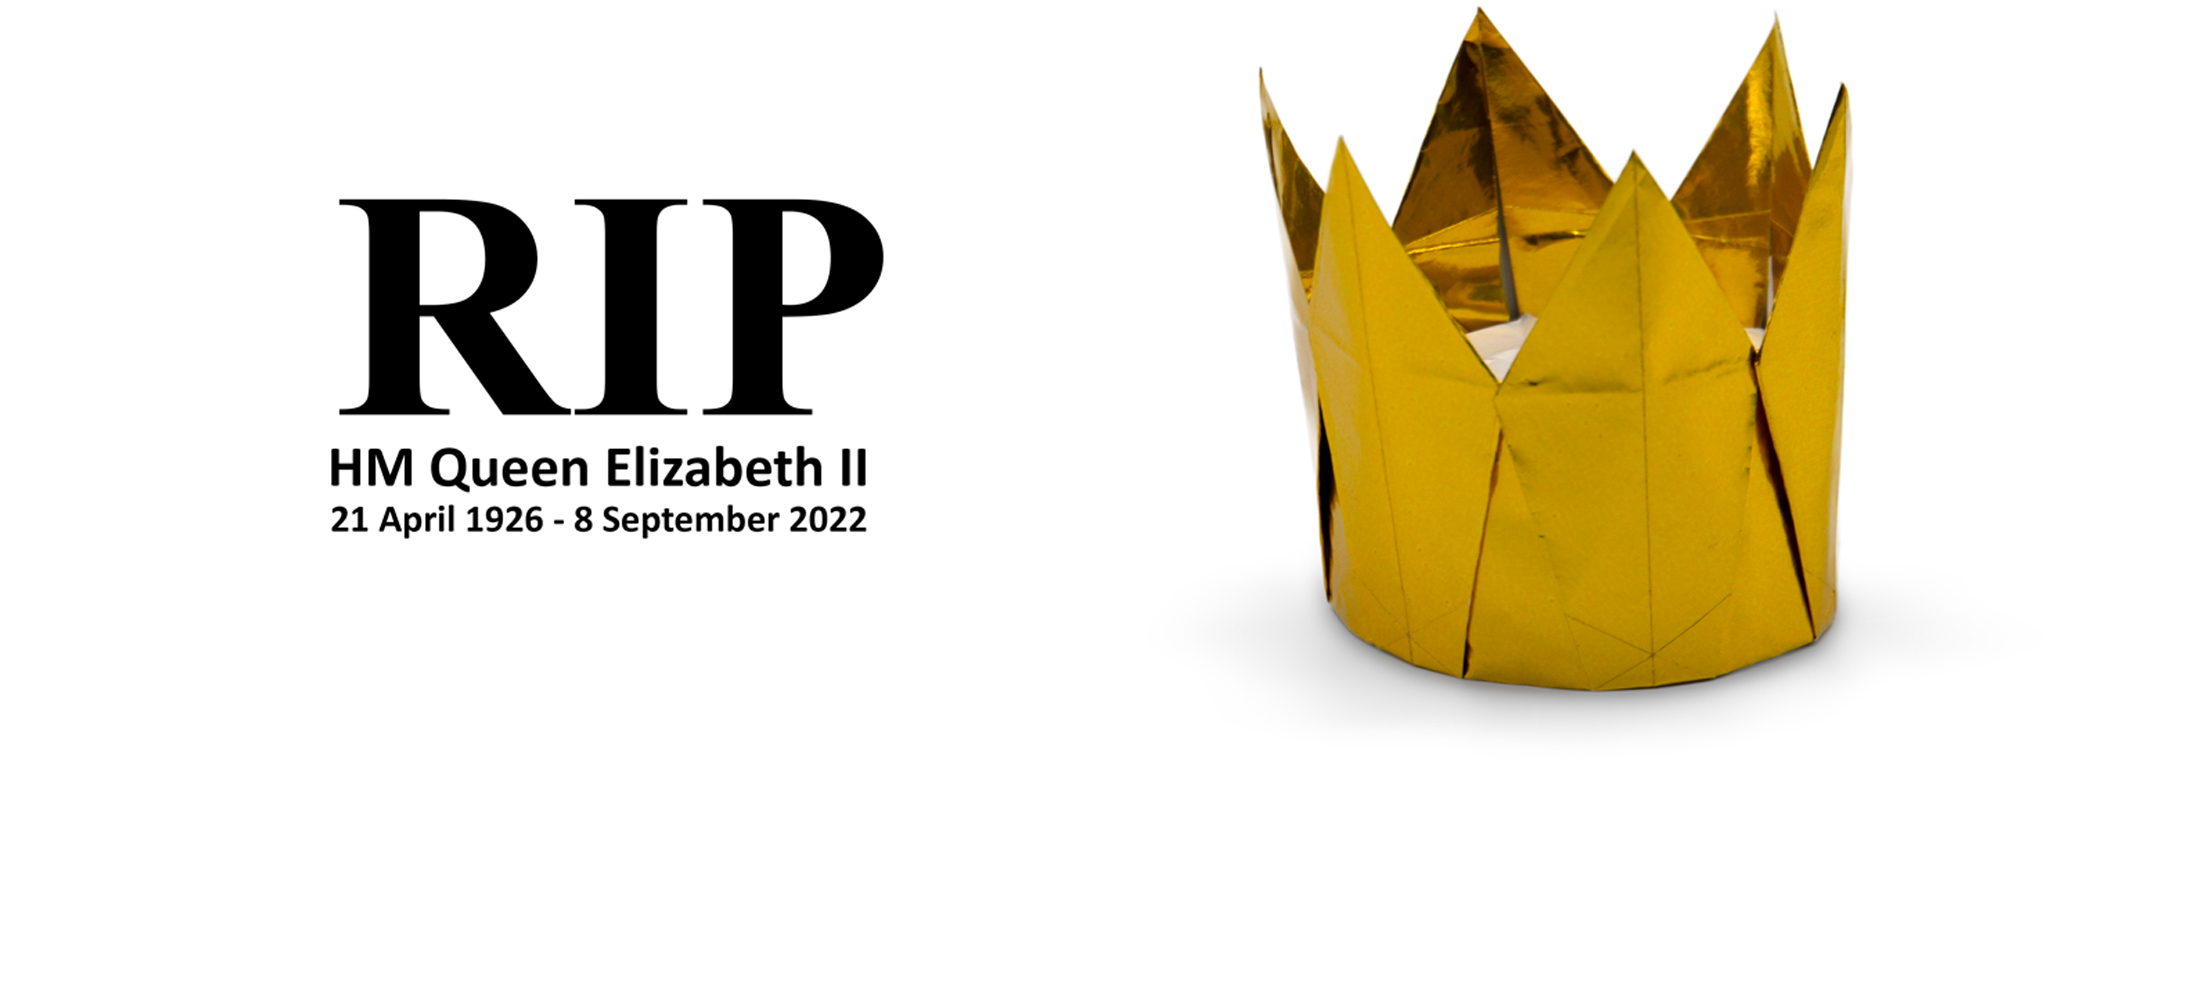 6-pointed crown and RIP text for HM Queen Eizabeth II